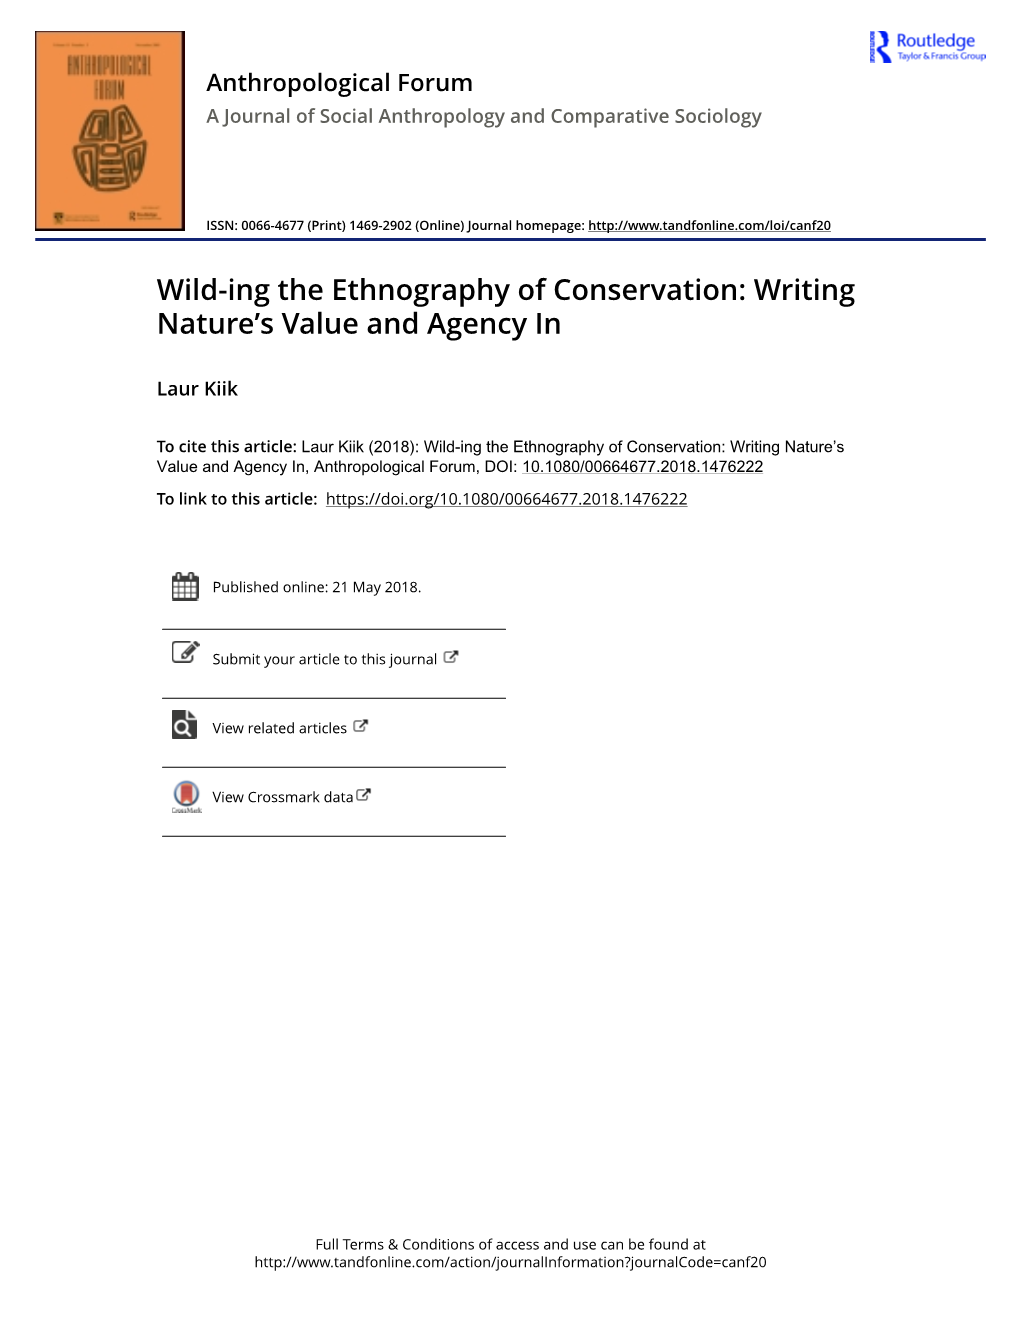 Wild-Ing the Ethnography of Conservation: Writing Nature's